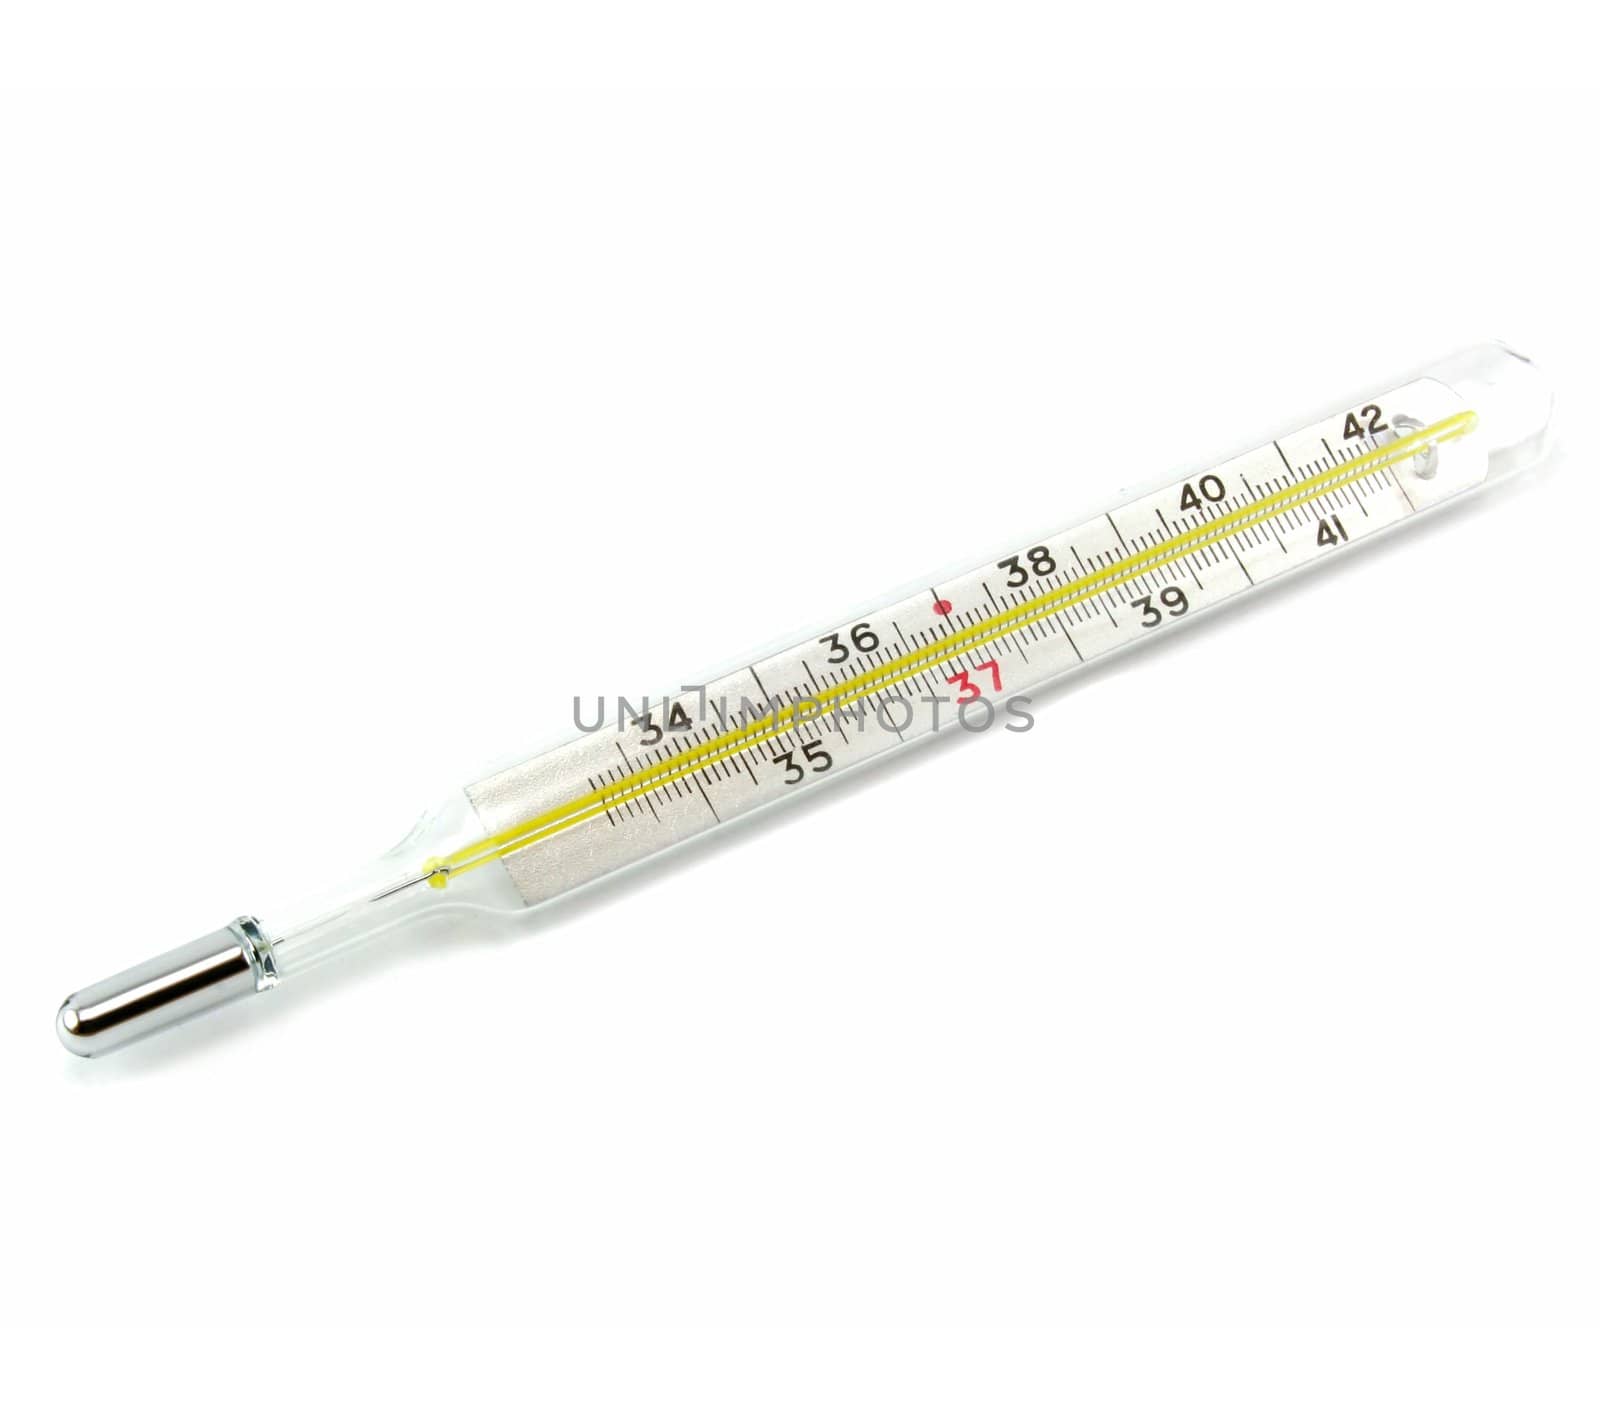 Clinical mercury thermometer isolated on a white background